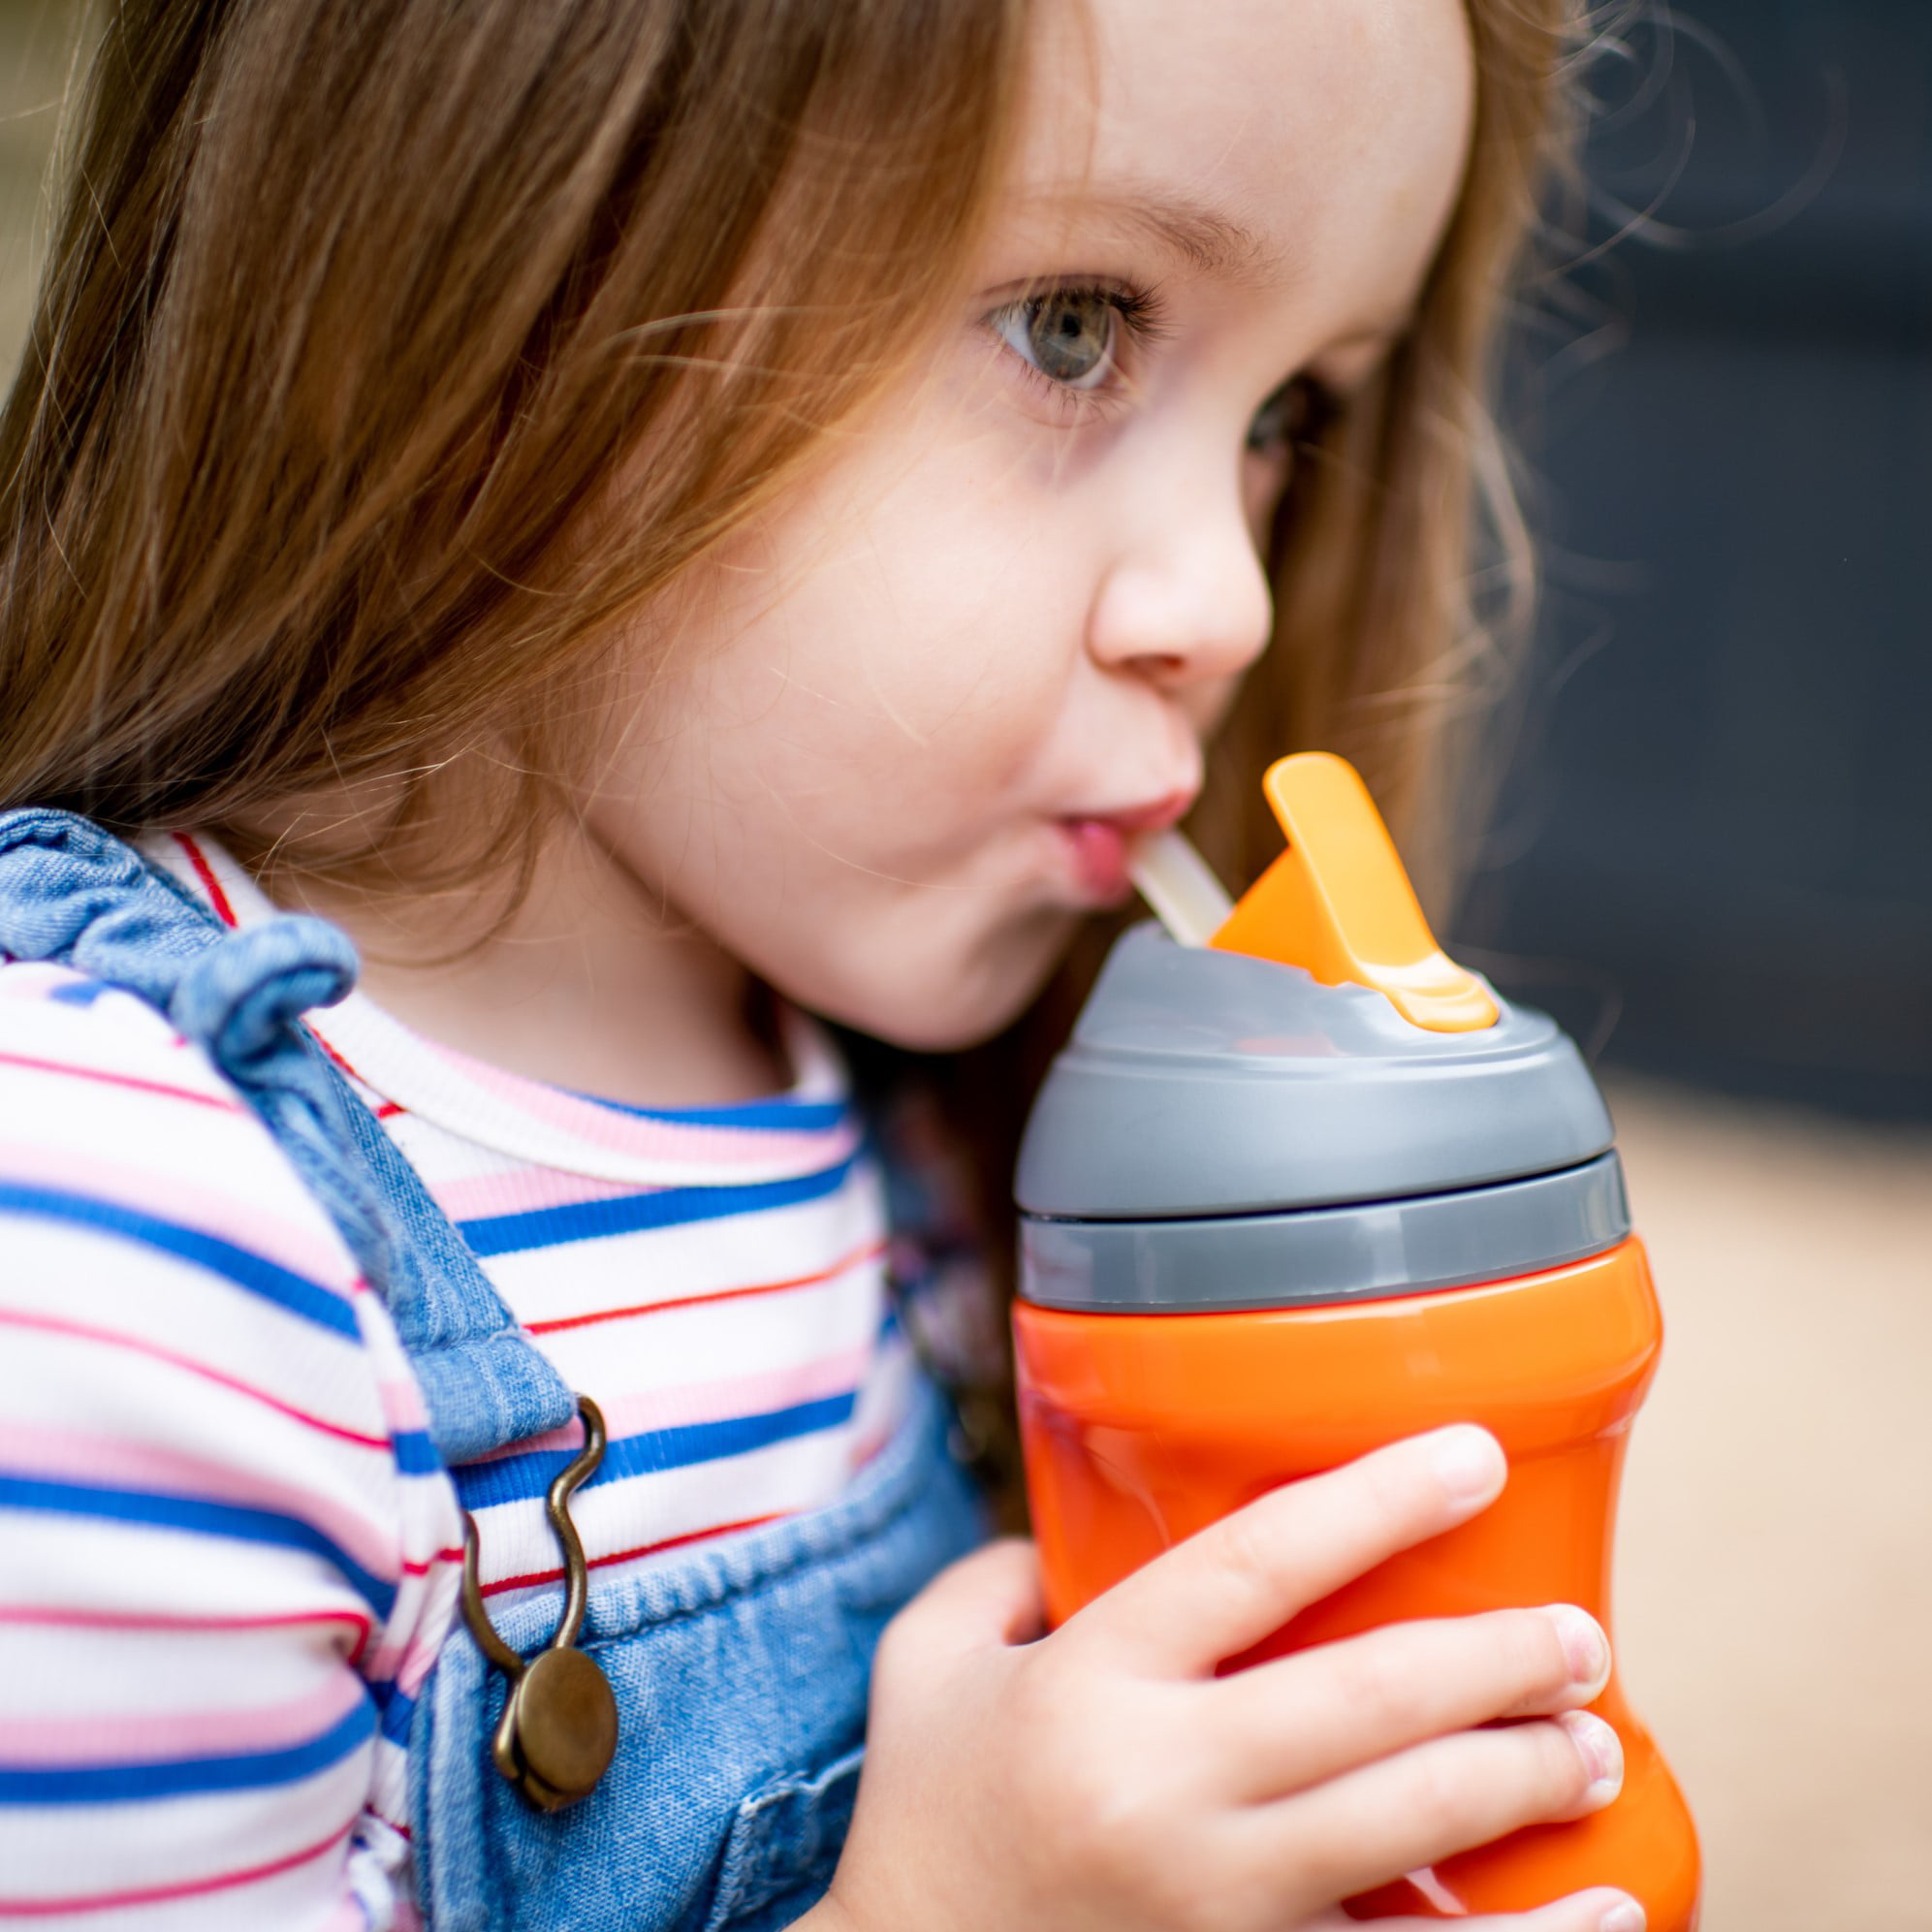 Tommee Tippee Insulated Spill-Proof Straw Cup, 12 months+, 9oz, Toddler  Training Sippy Cup, Sporty C…See more Tommee Tippee Insulated Spill-Proof